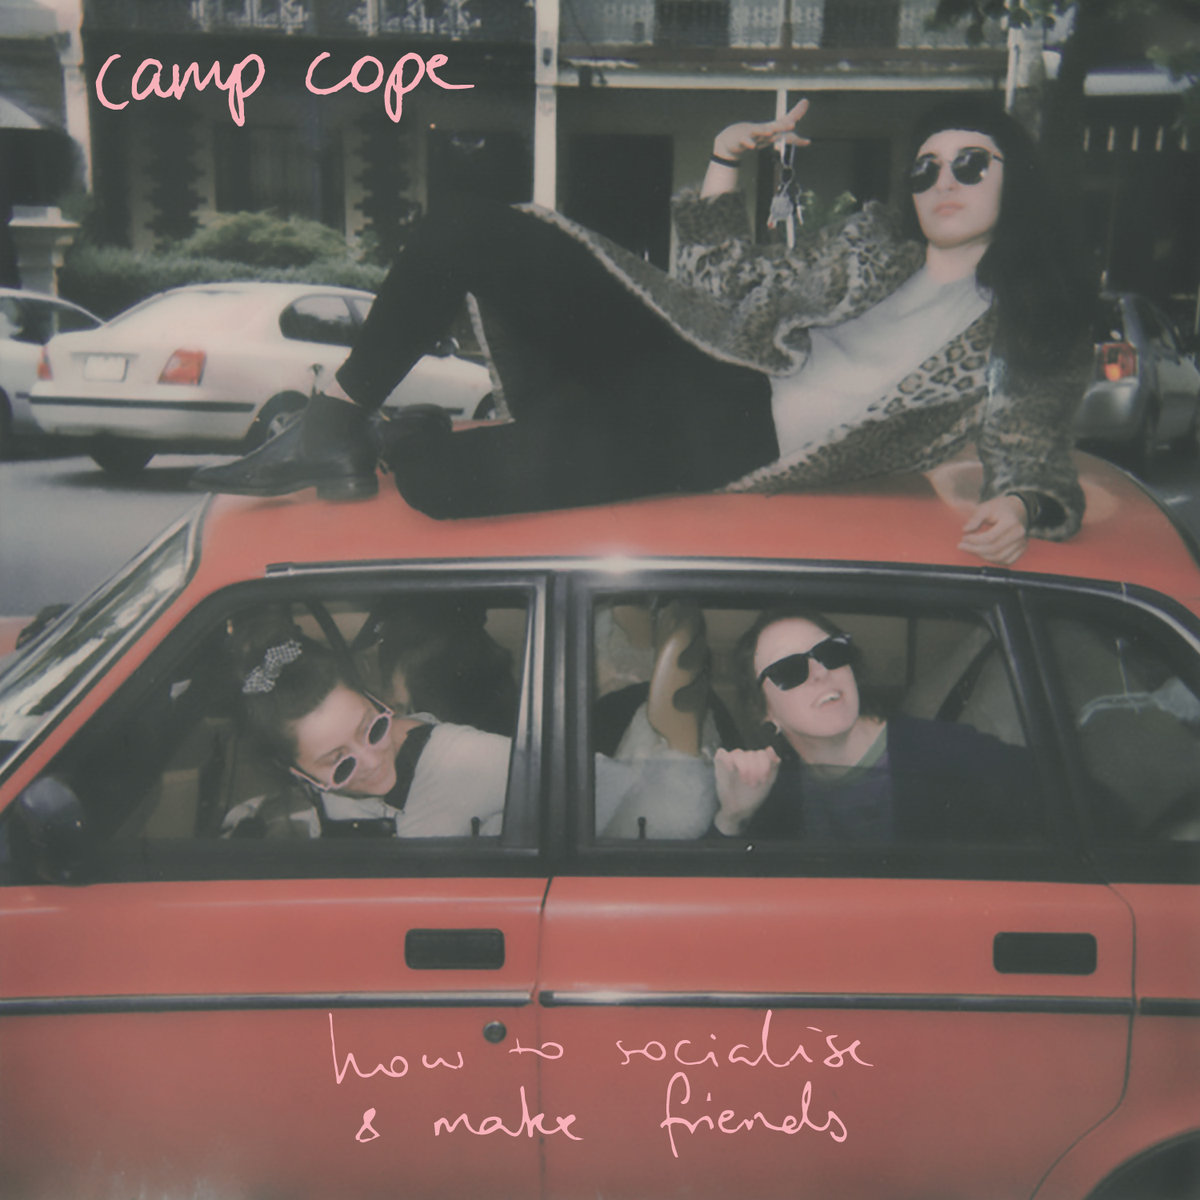 Camp Cope How to Socialise & Make Friends